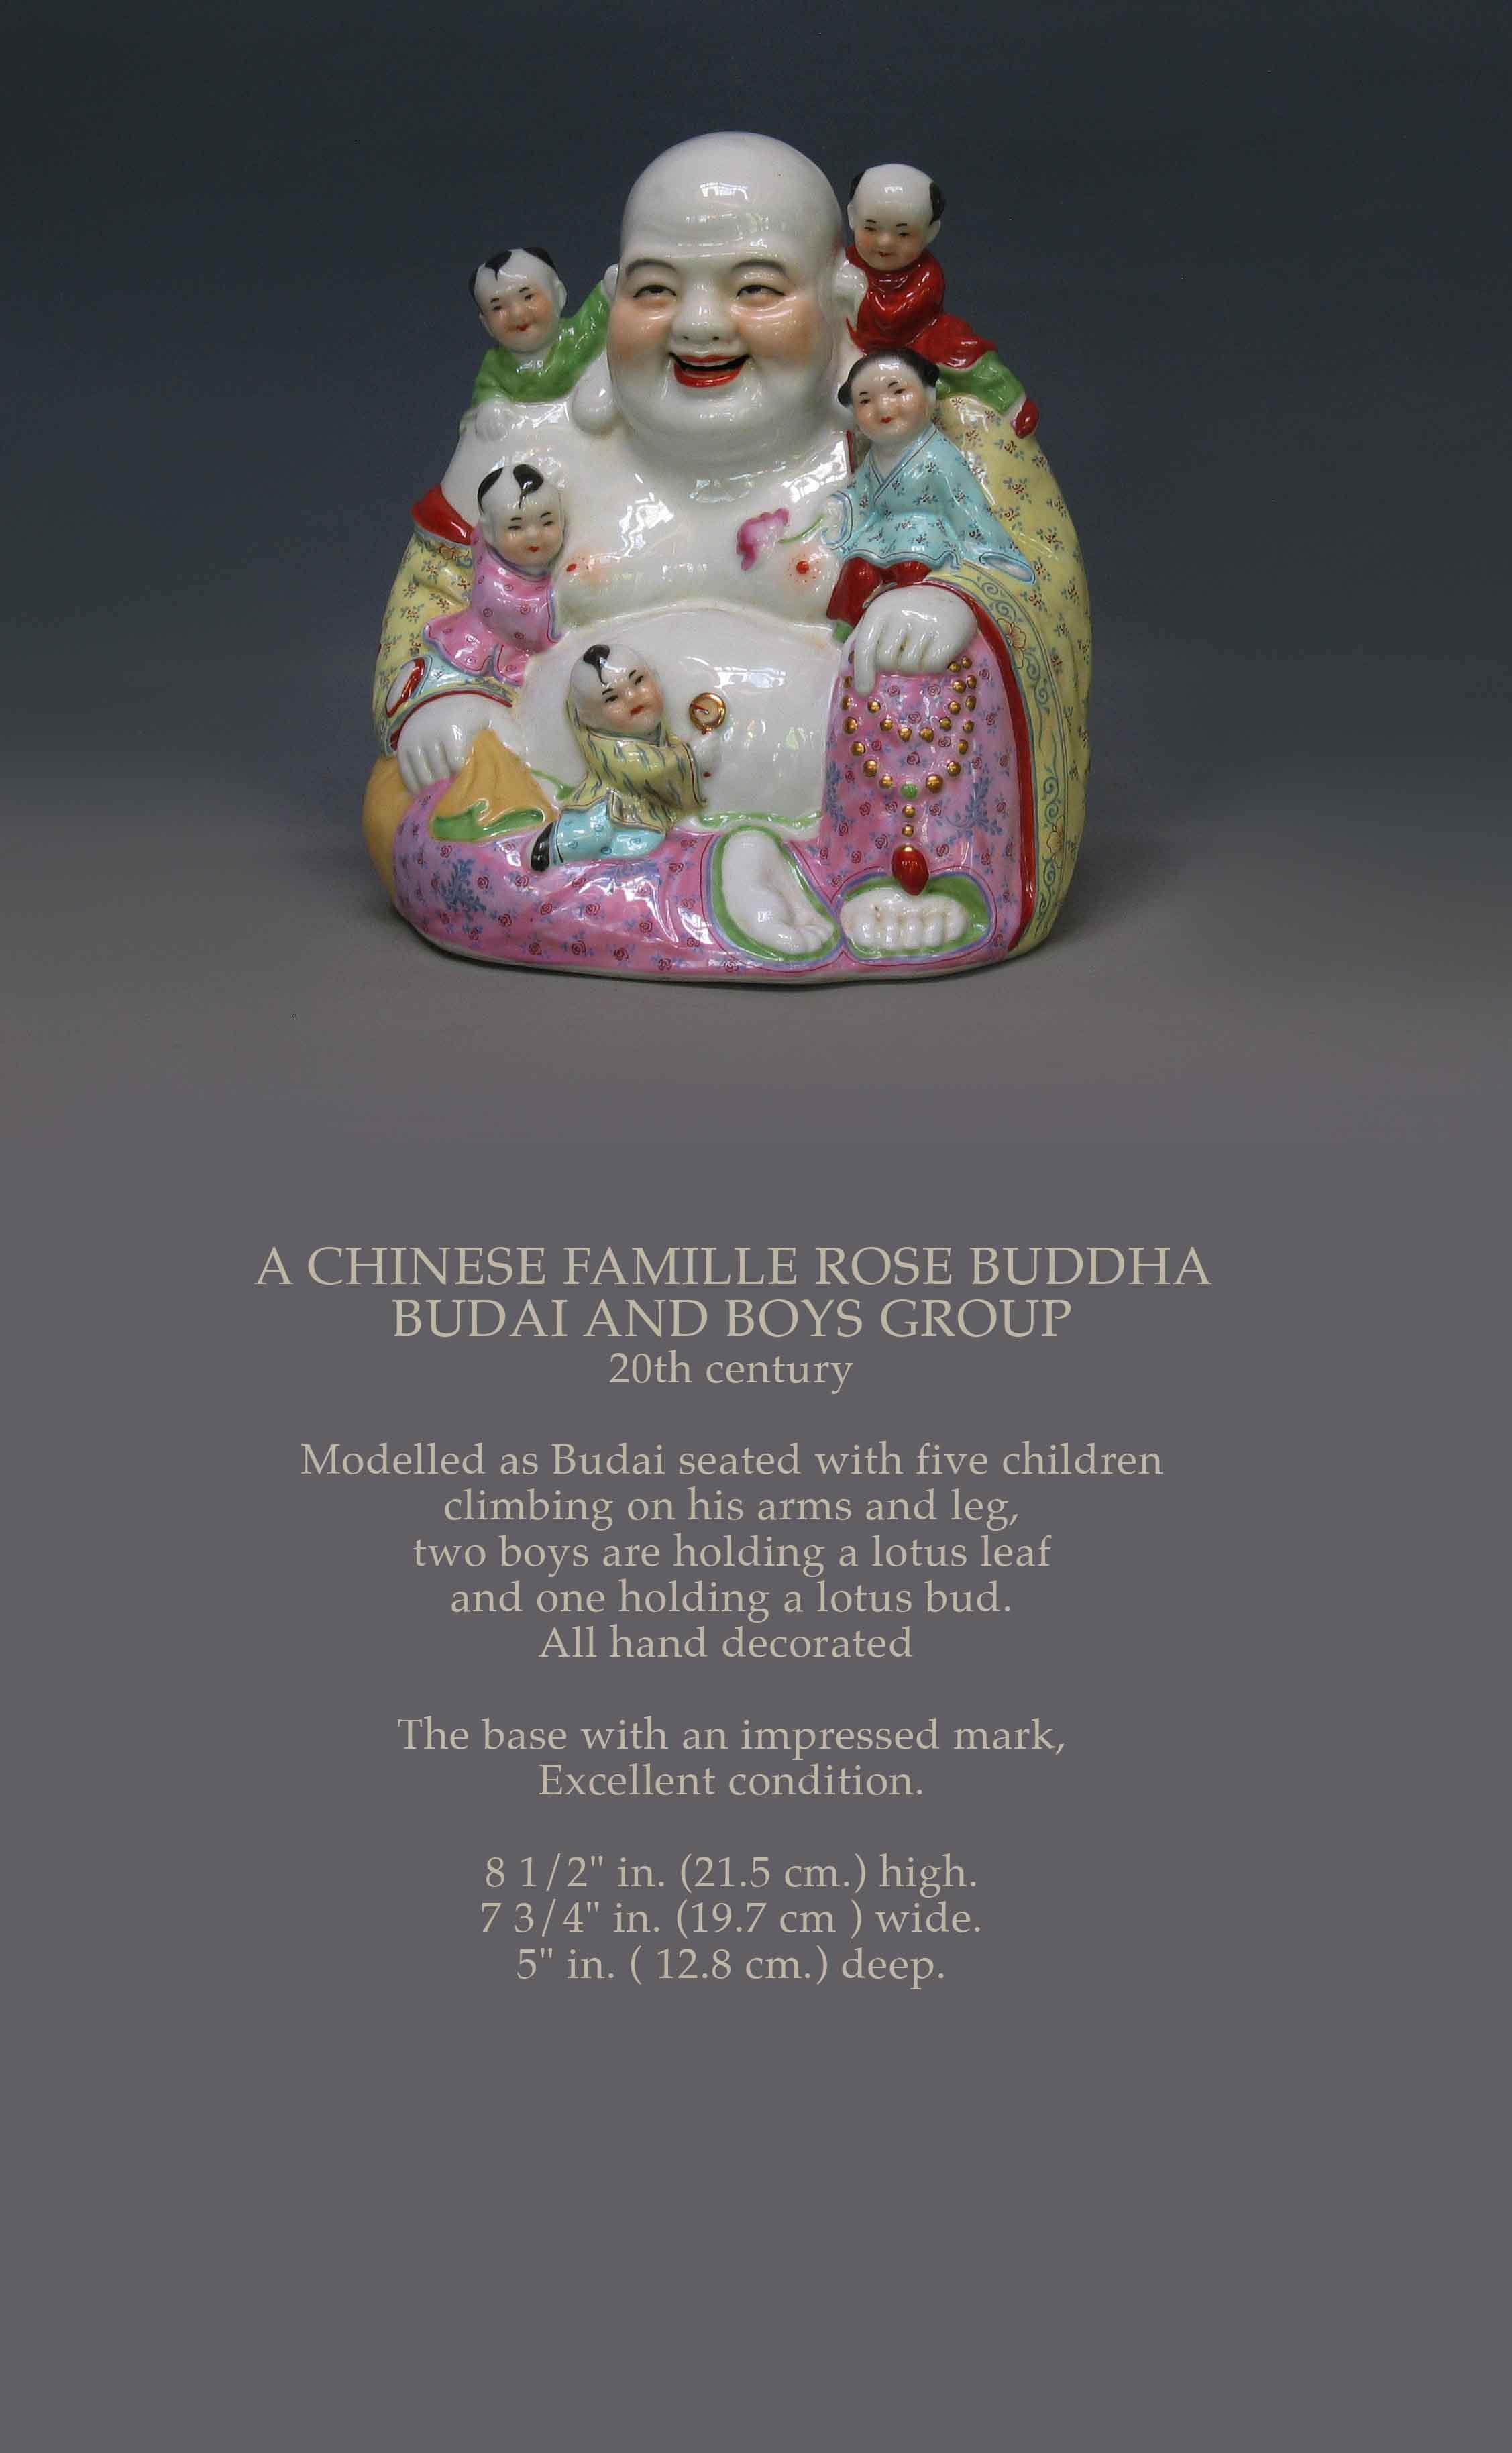 A CHINESE FAMILLE ROSE BUDDHA
BUDAI AND BOYS GROUP
20th Century

Modelled as Budai seated with five children
climbing on his arms and leg,
two boys are holding a lotus leaf
and one holding a lotus bud.
All hand decorated.

The base with an impressed